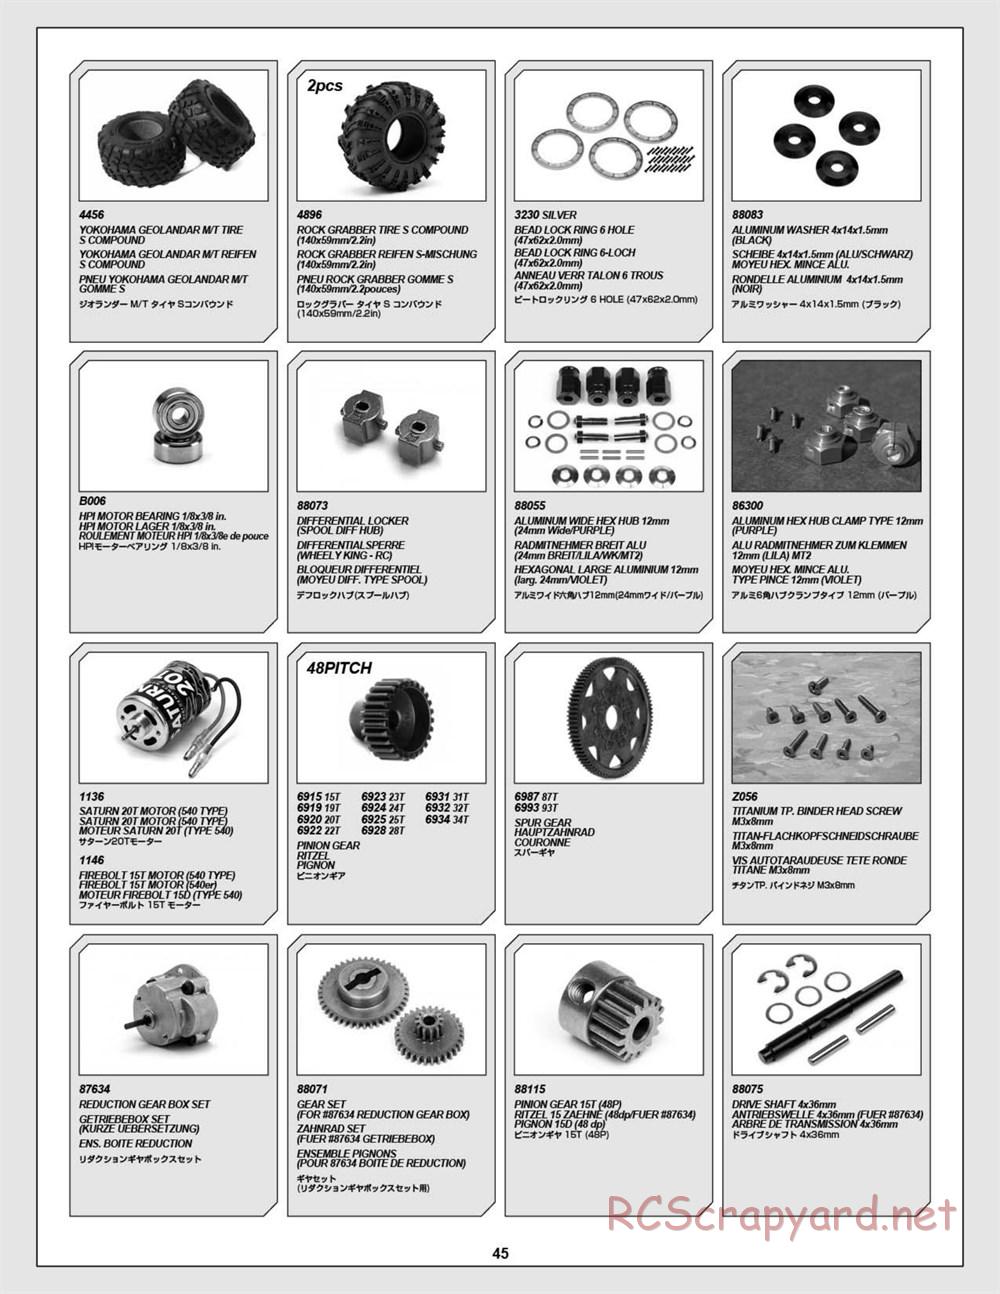 HPI - Wheely King 4x4 - Manual - Page 45